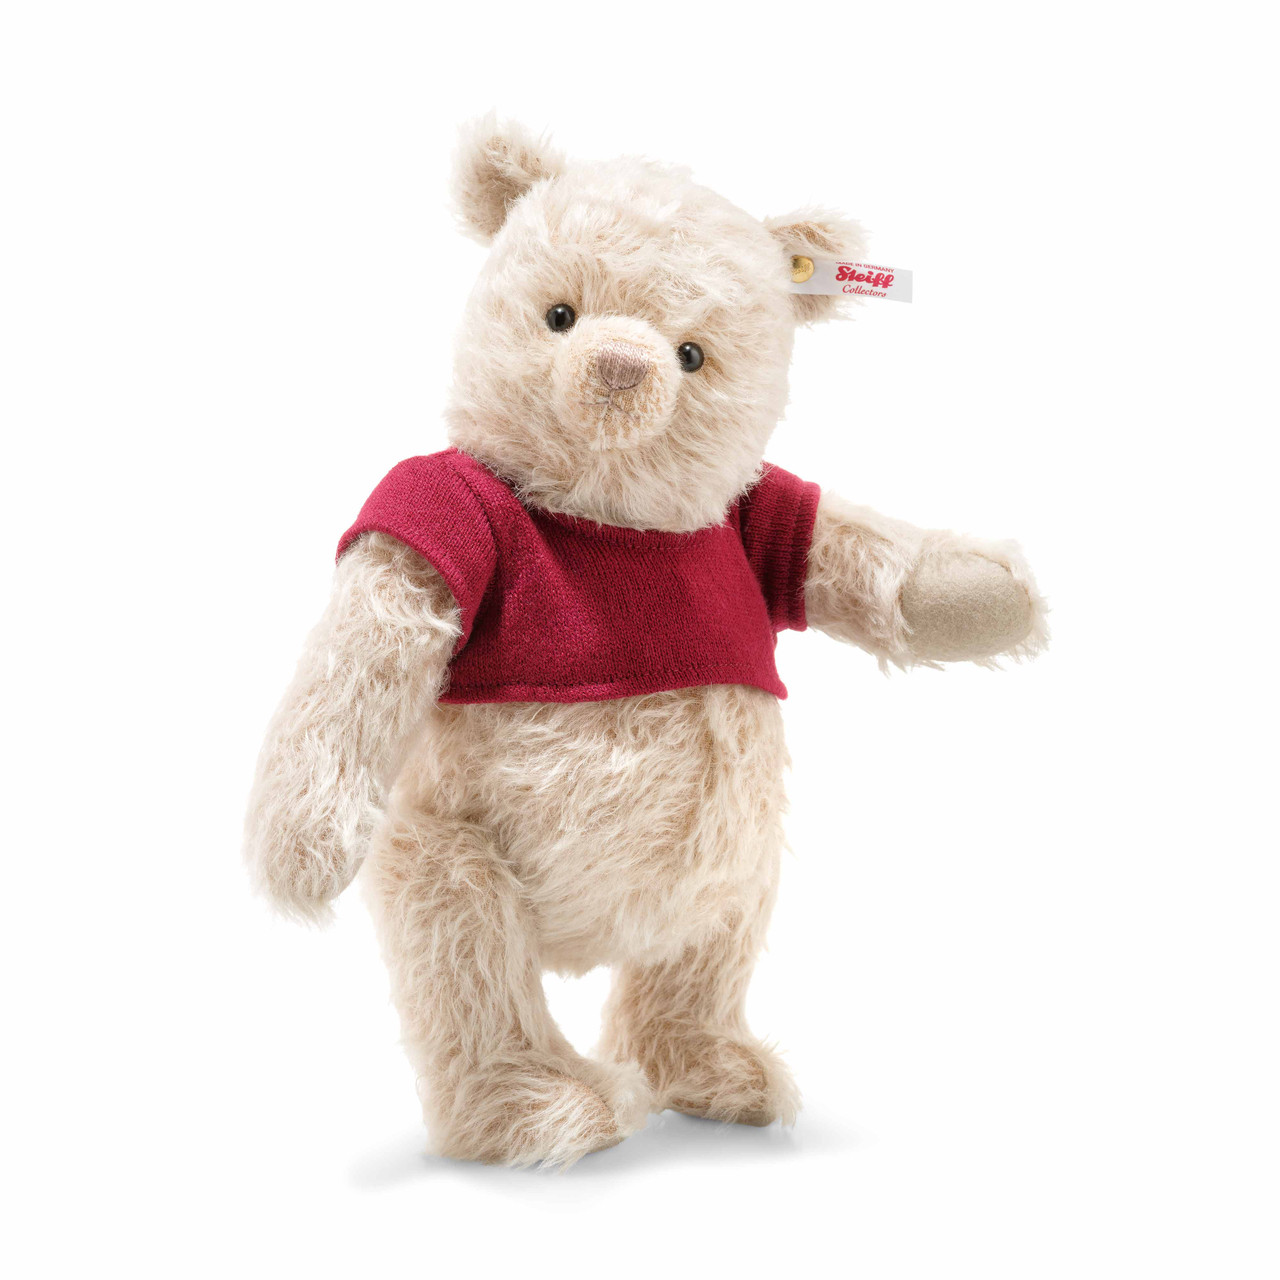 christopher robin pooh doll